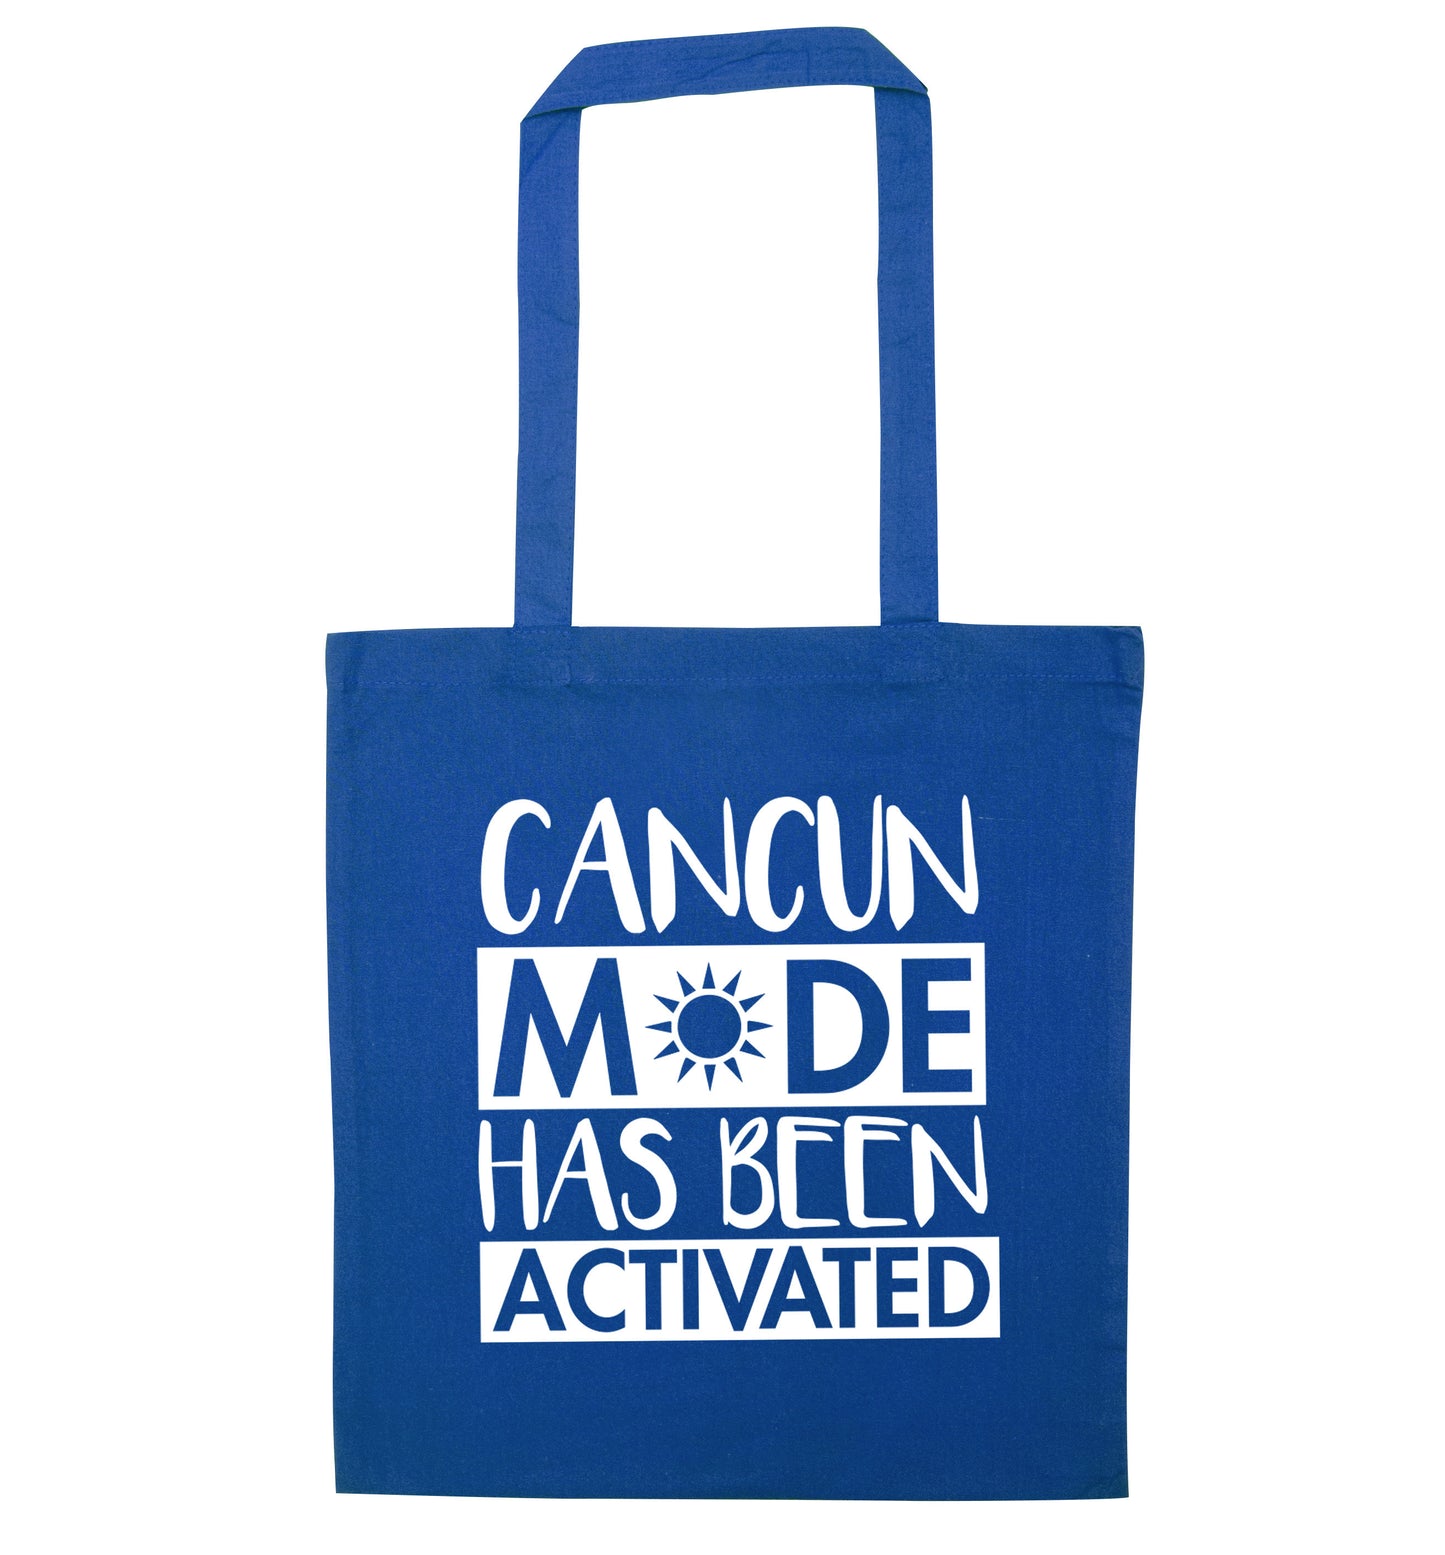 Cancun mode has been activated blue tote bag